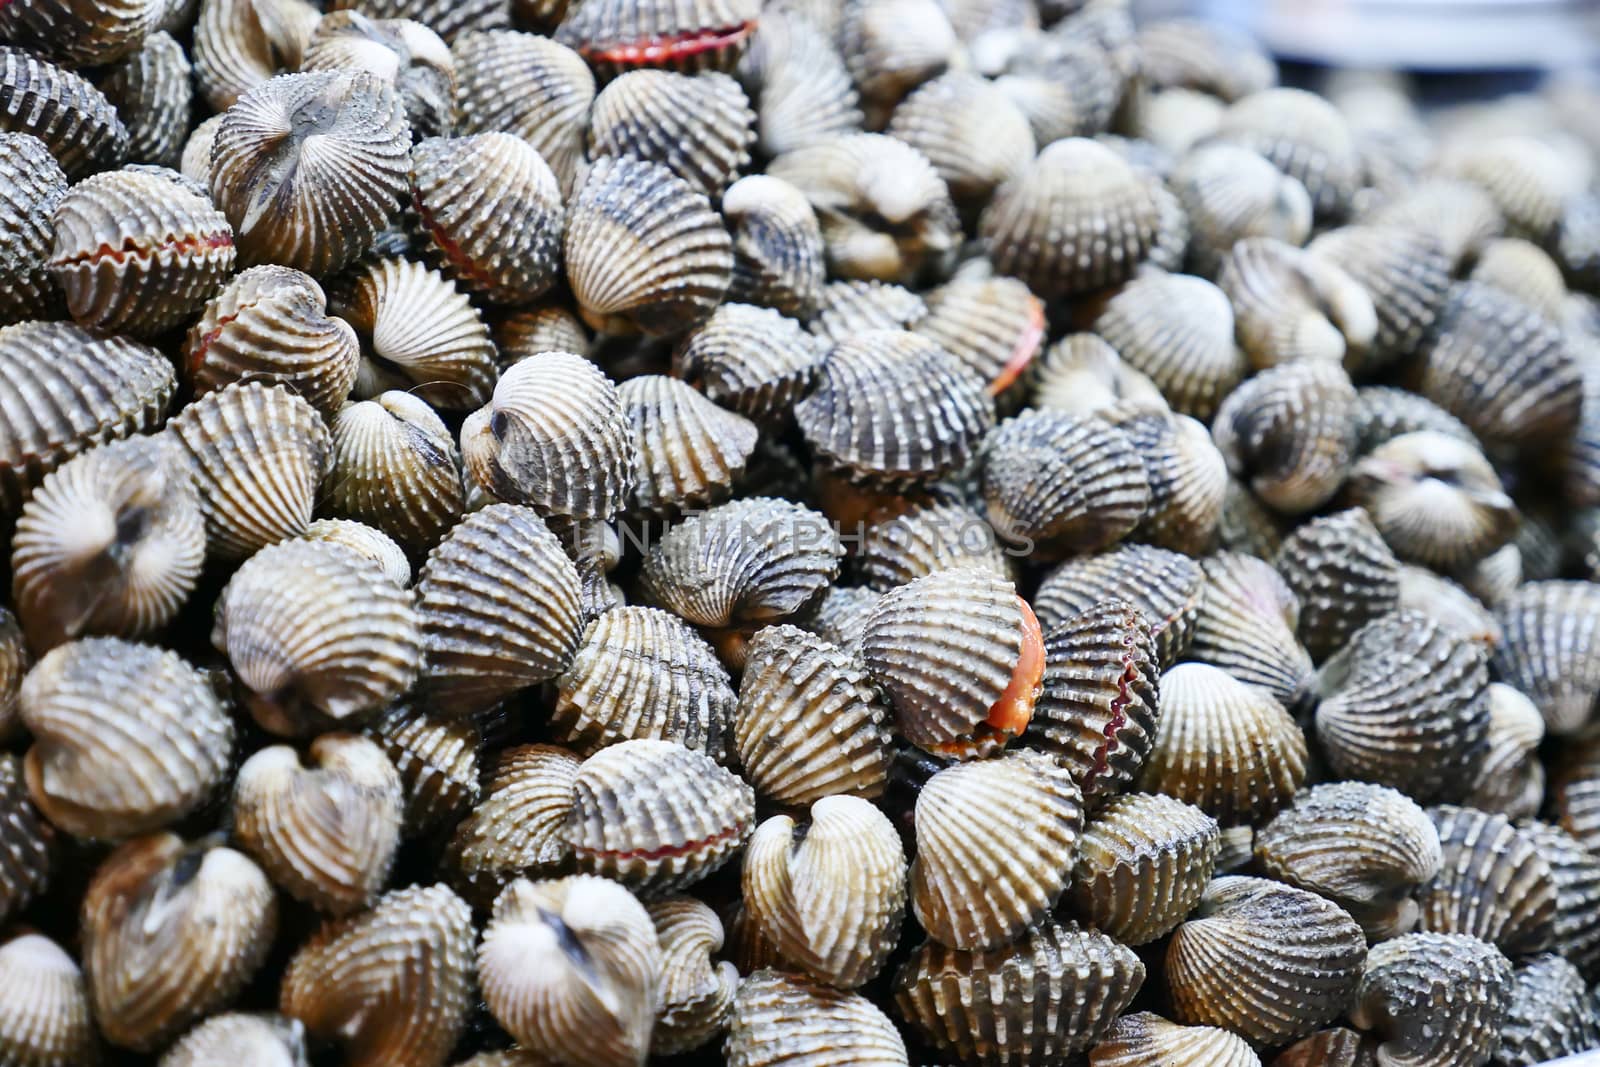 fresh cockles for sale at a market, selective focus.